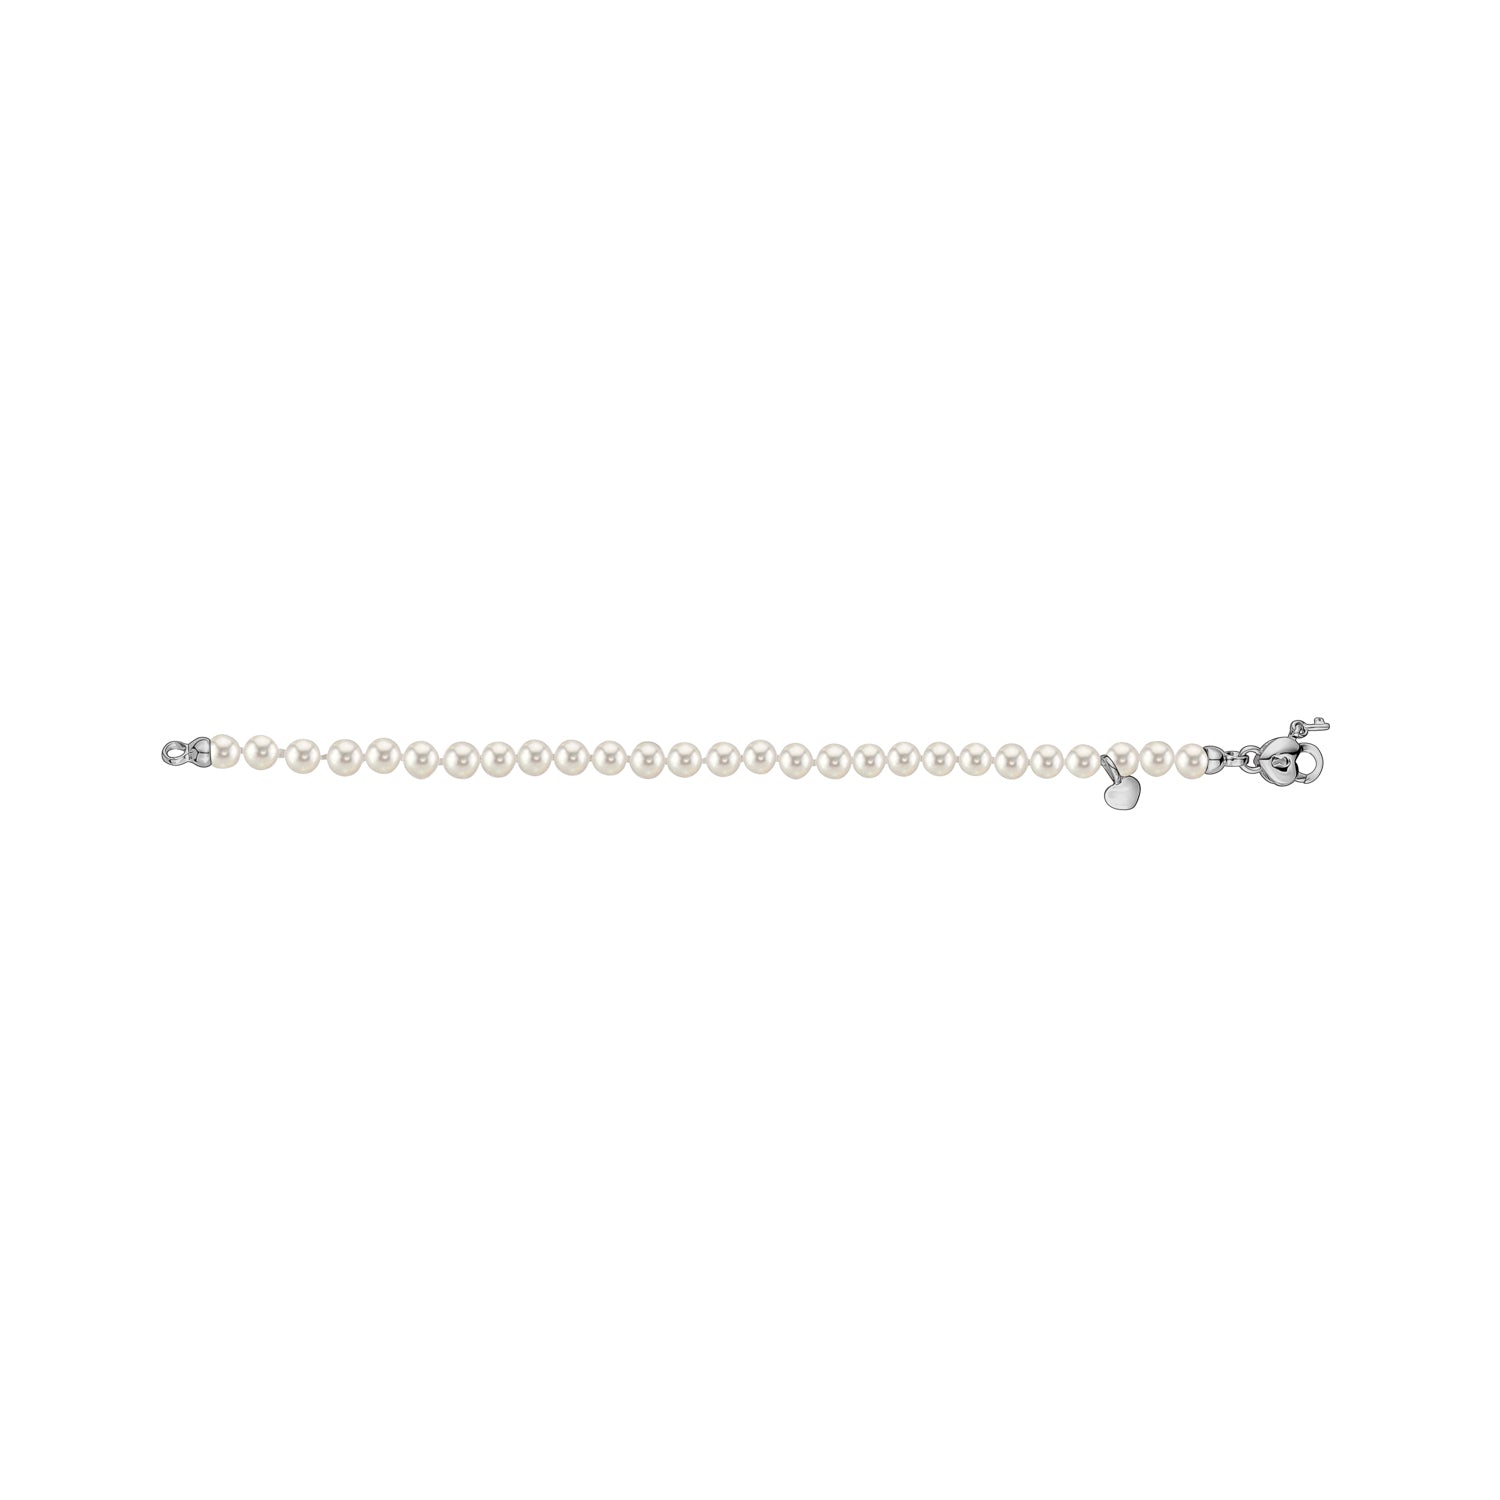 White Round Freshwater Cultured Pearl Bracelet for Girls 5mm Sterling Silver Heart Shape Key Lock Charm Clasp 6.5"